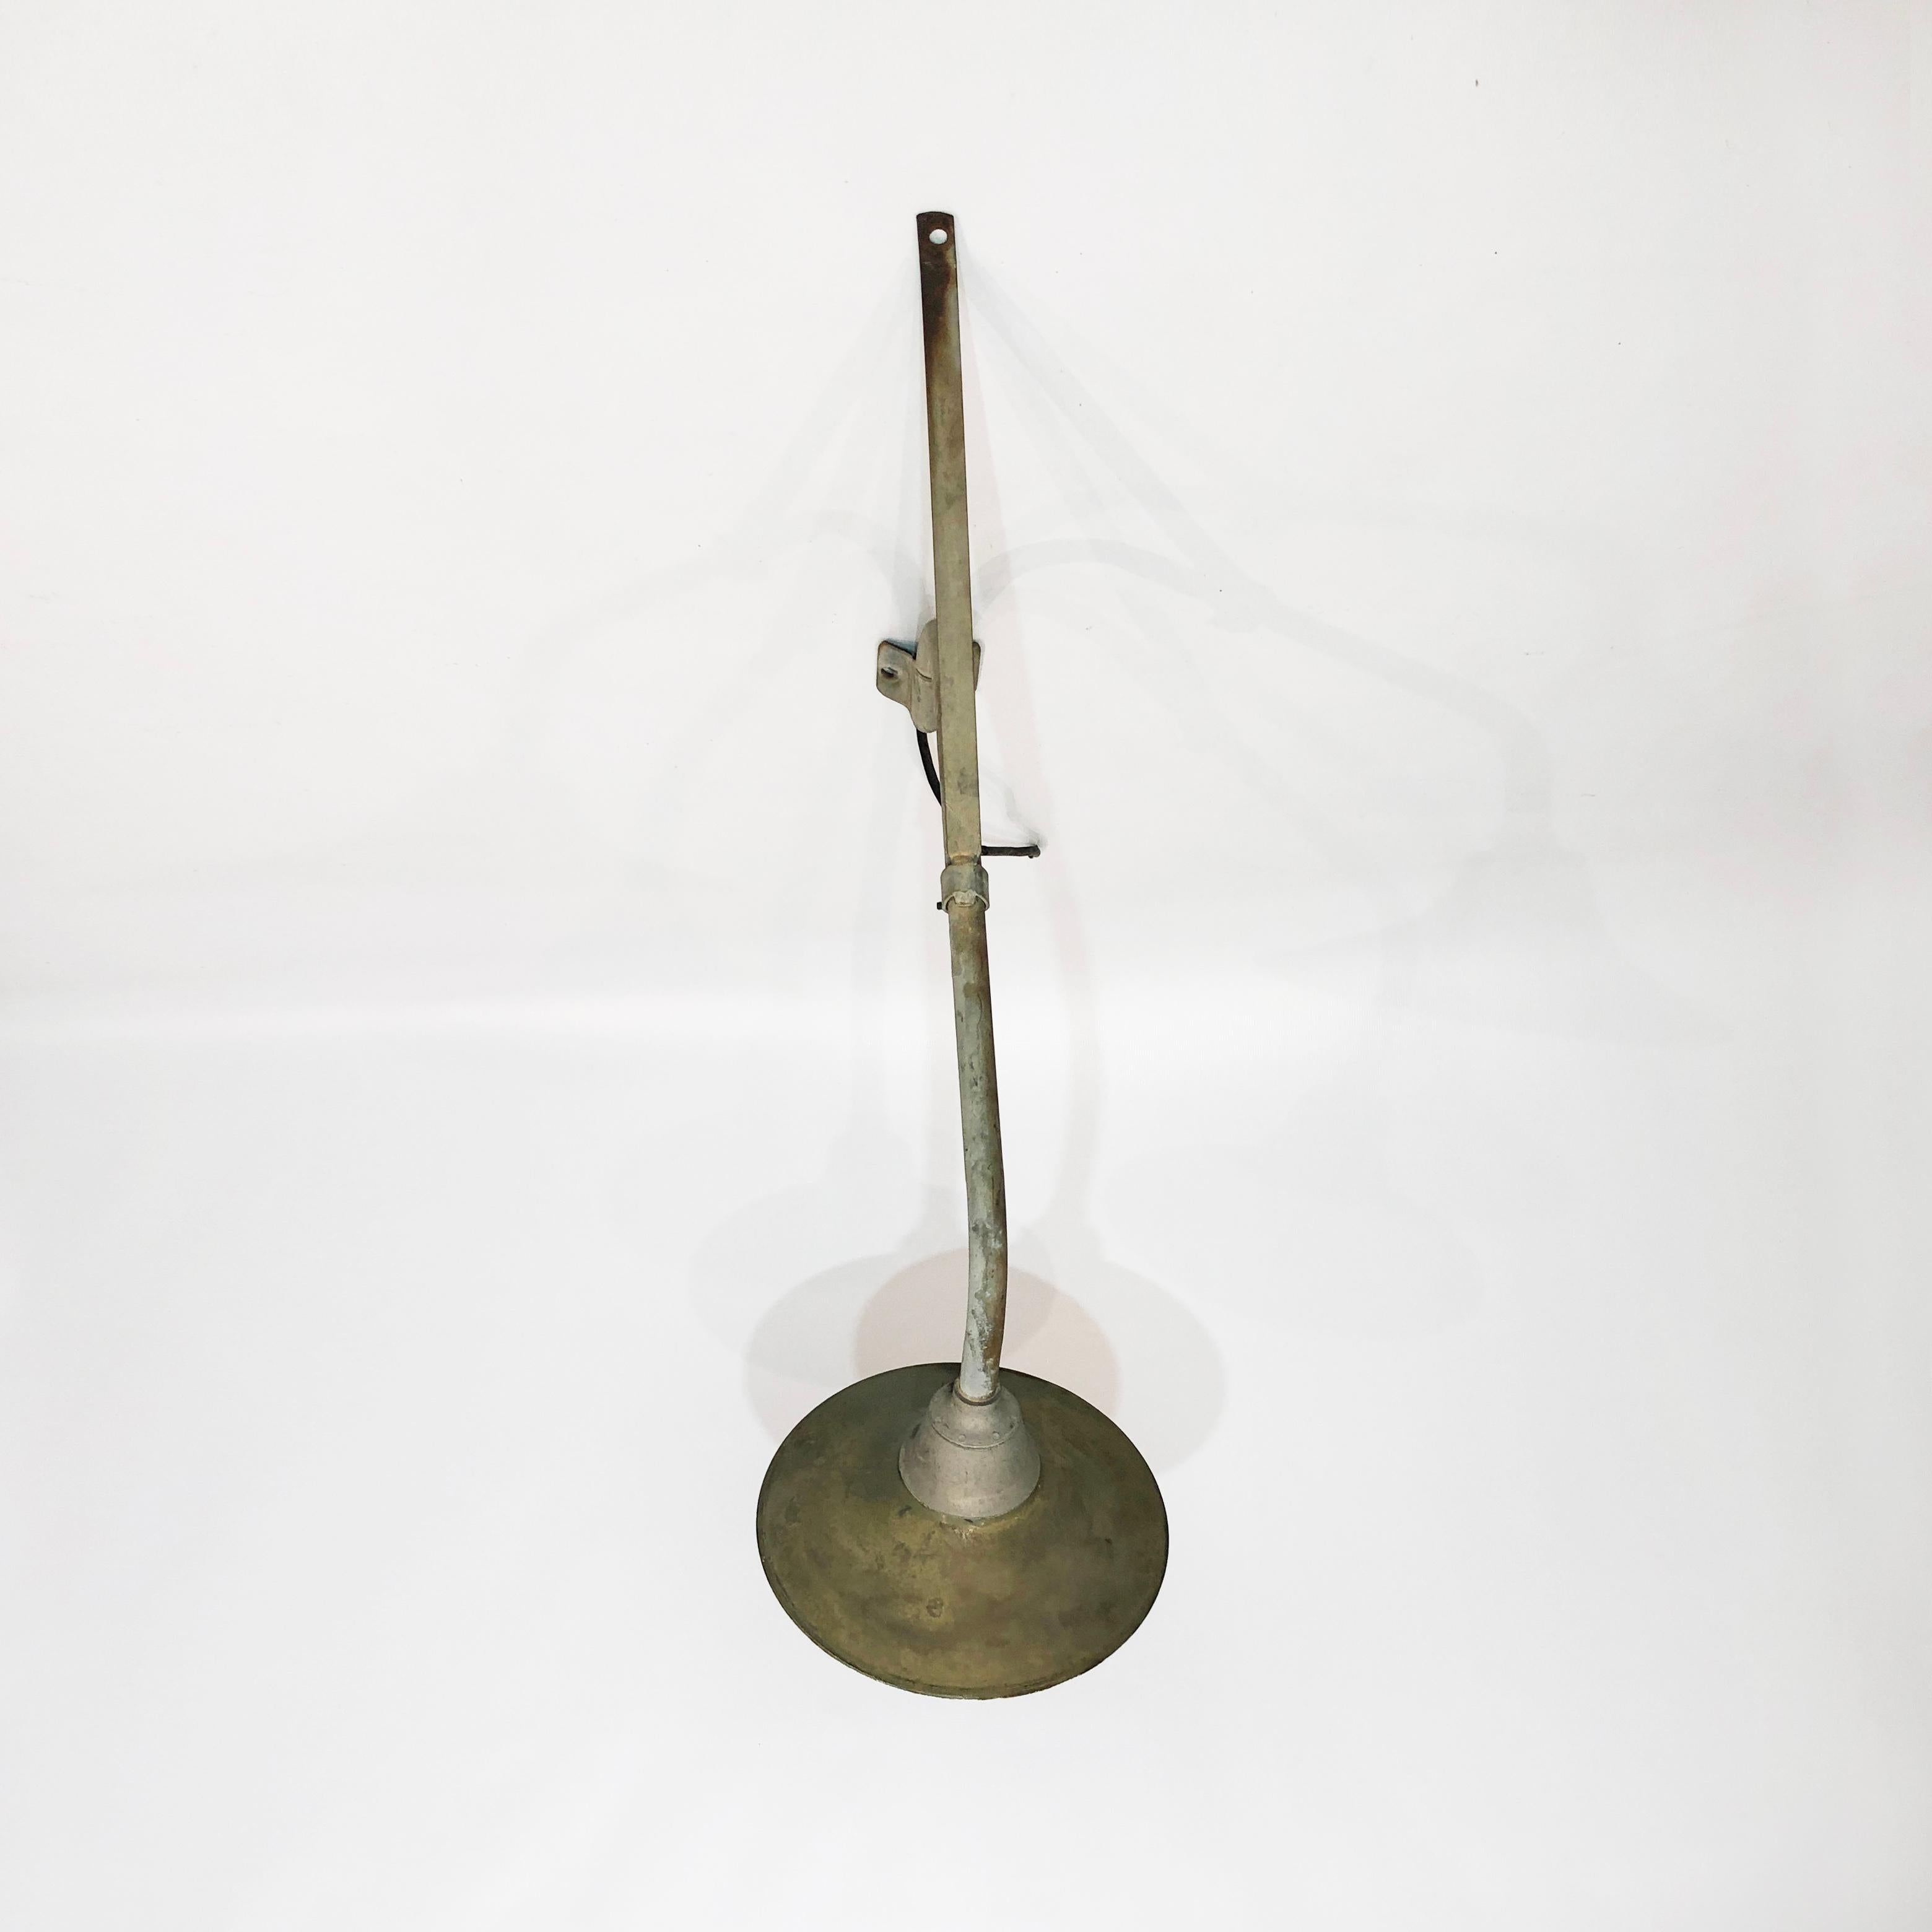 Mid-20th Century Large Industrial Wall Light 1 of 3 1950s Vintage Retro Commercial Lighting Lamp